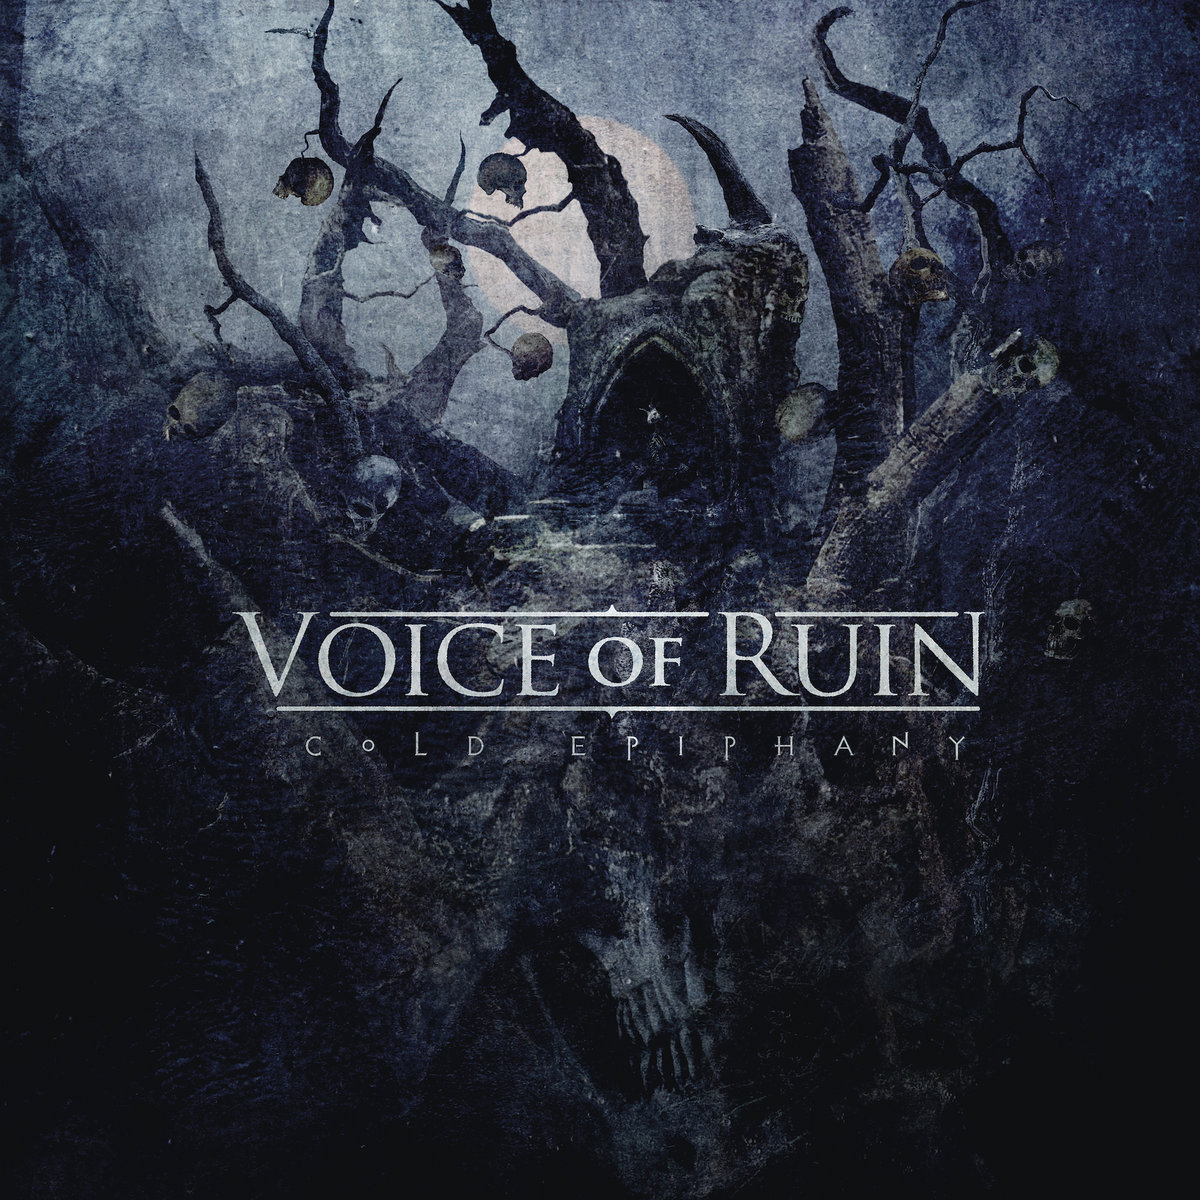 Voice of Ruin - Cold Epiphany
Melodic Death/Thrash/Groove Metal from Nyon, Switzerland
Release date: December 1st, 2023

voiceofruin.bandcamp.com/music

#VoiceofRuin #swissmetal #deathmetal
#groovemetal #deathmetalband
#melodicdeathmetal #thrashmetal #deaththrash
#thrashdeat…